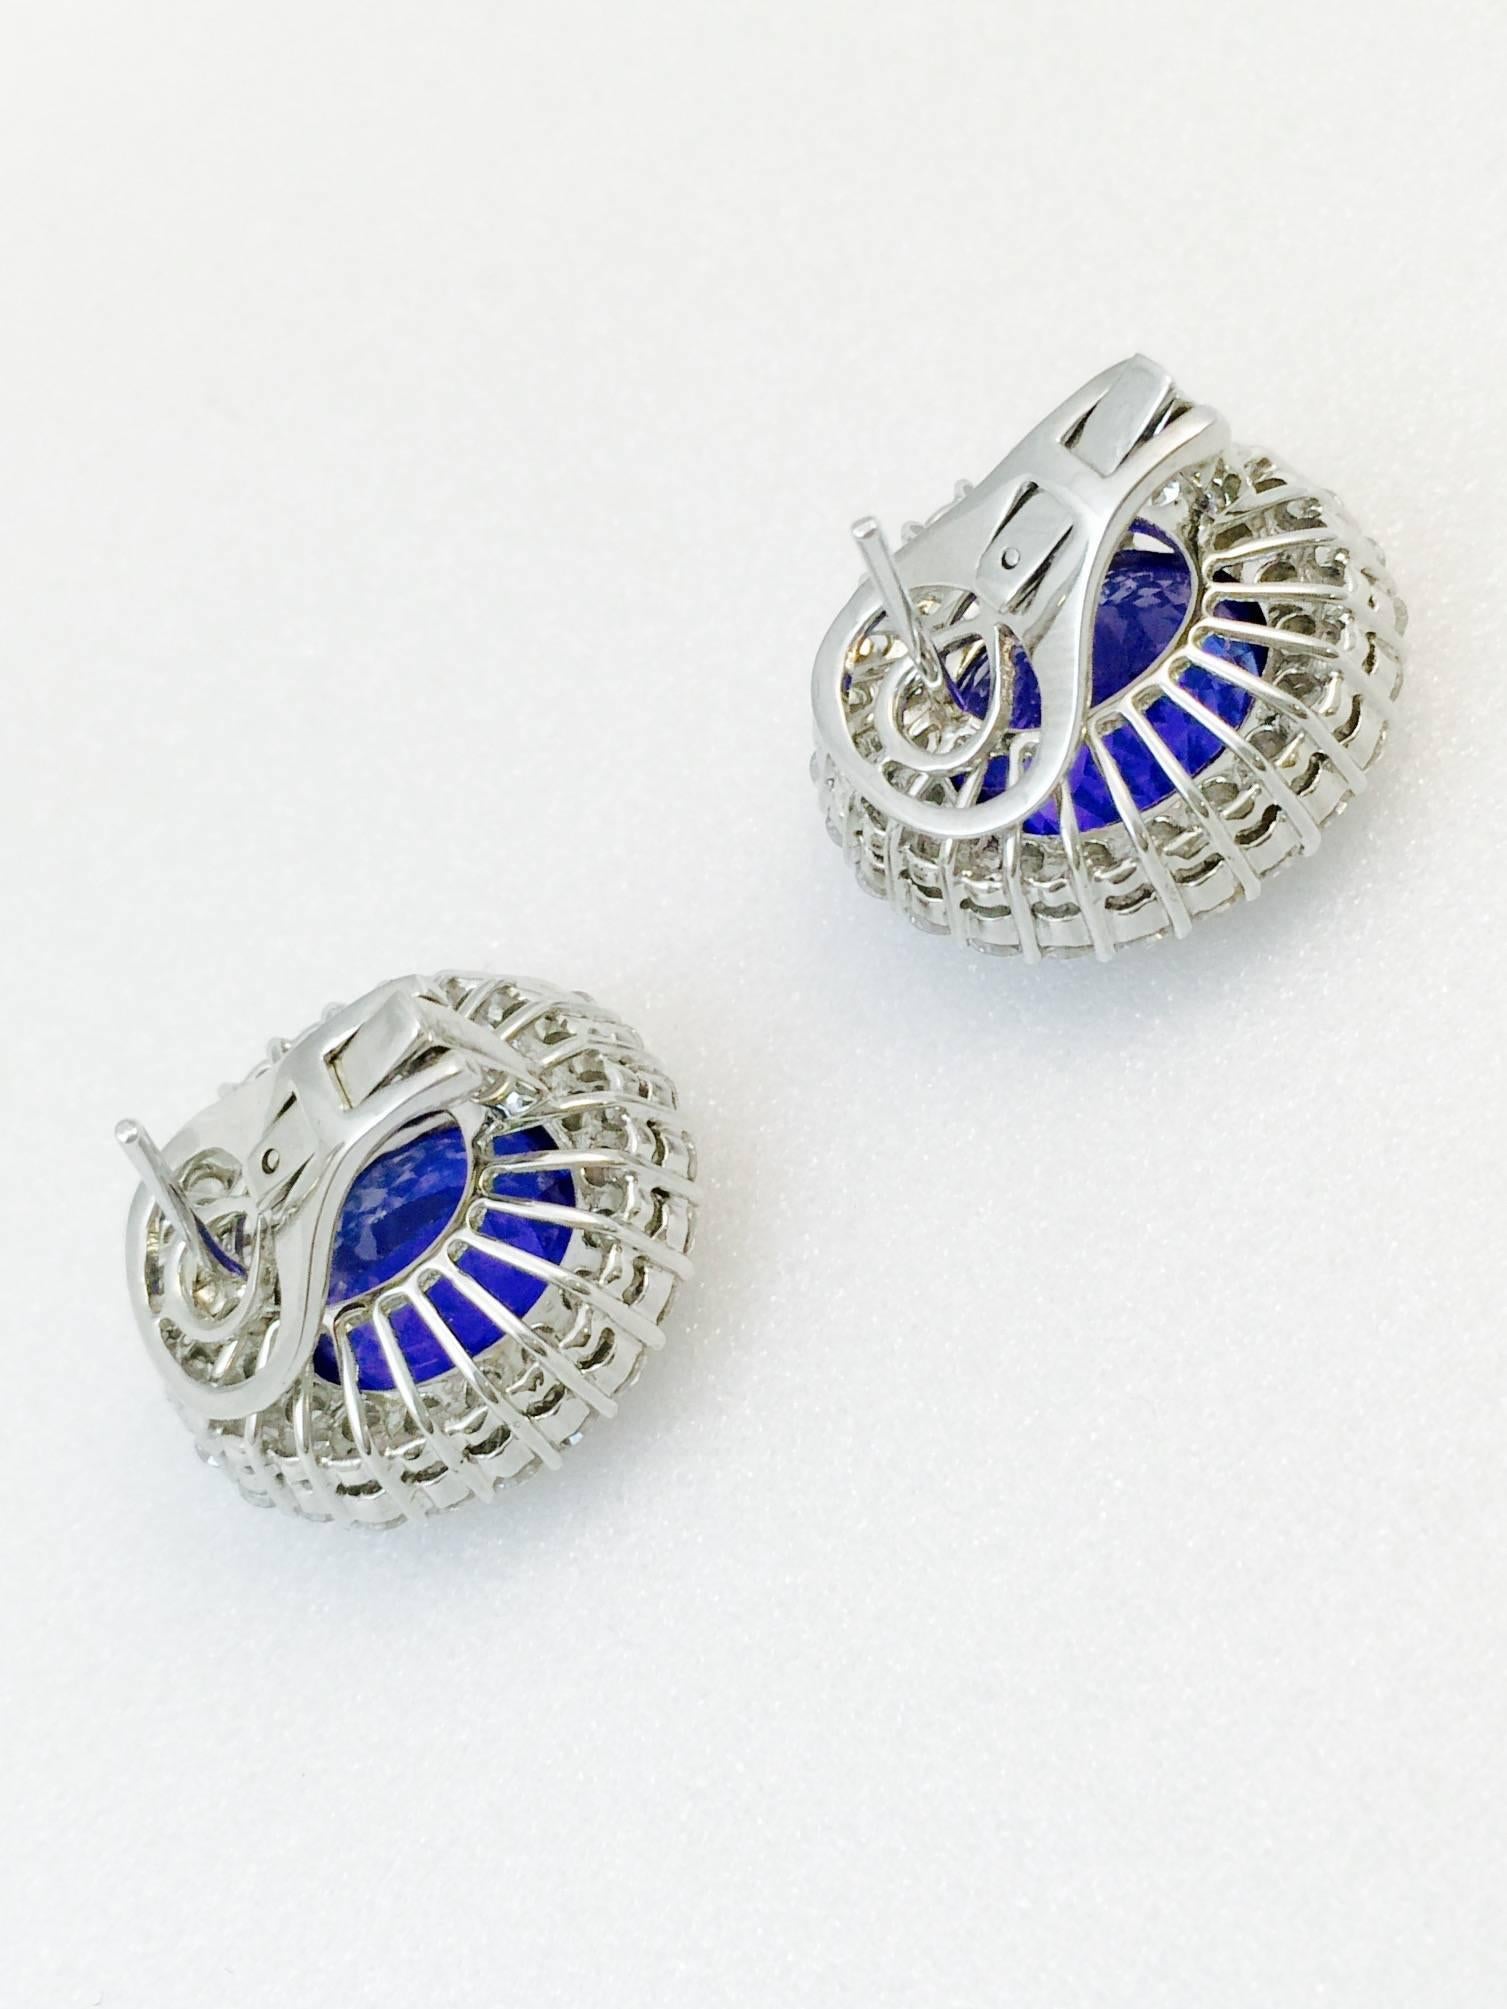 Italian made in 18 karat white gold, these Omega back pierced earrings are nothing short of tremendous!  Beautifully matched tanzanites boast magnificent depth of color with even saturation and have a total weight of 14.90 carats.  Two rows of prong